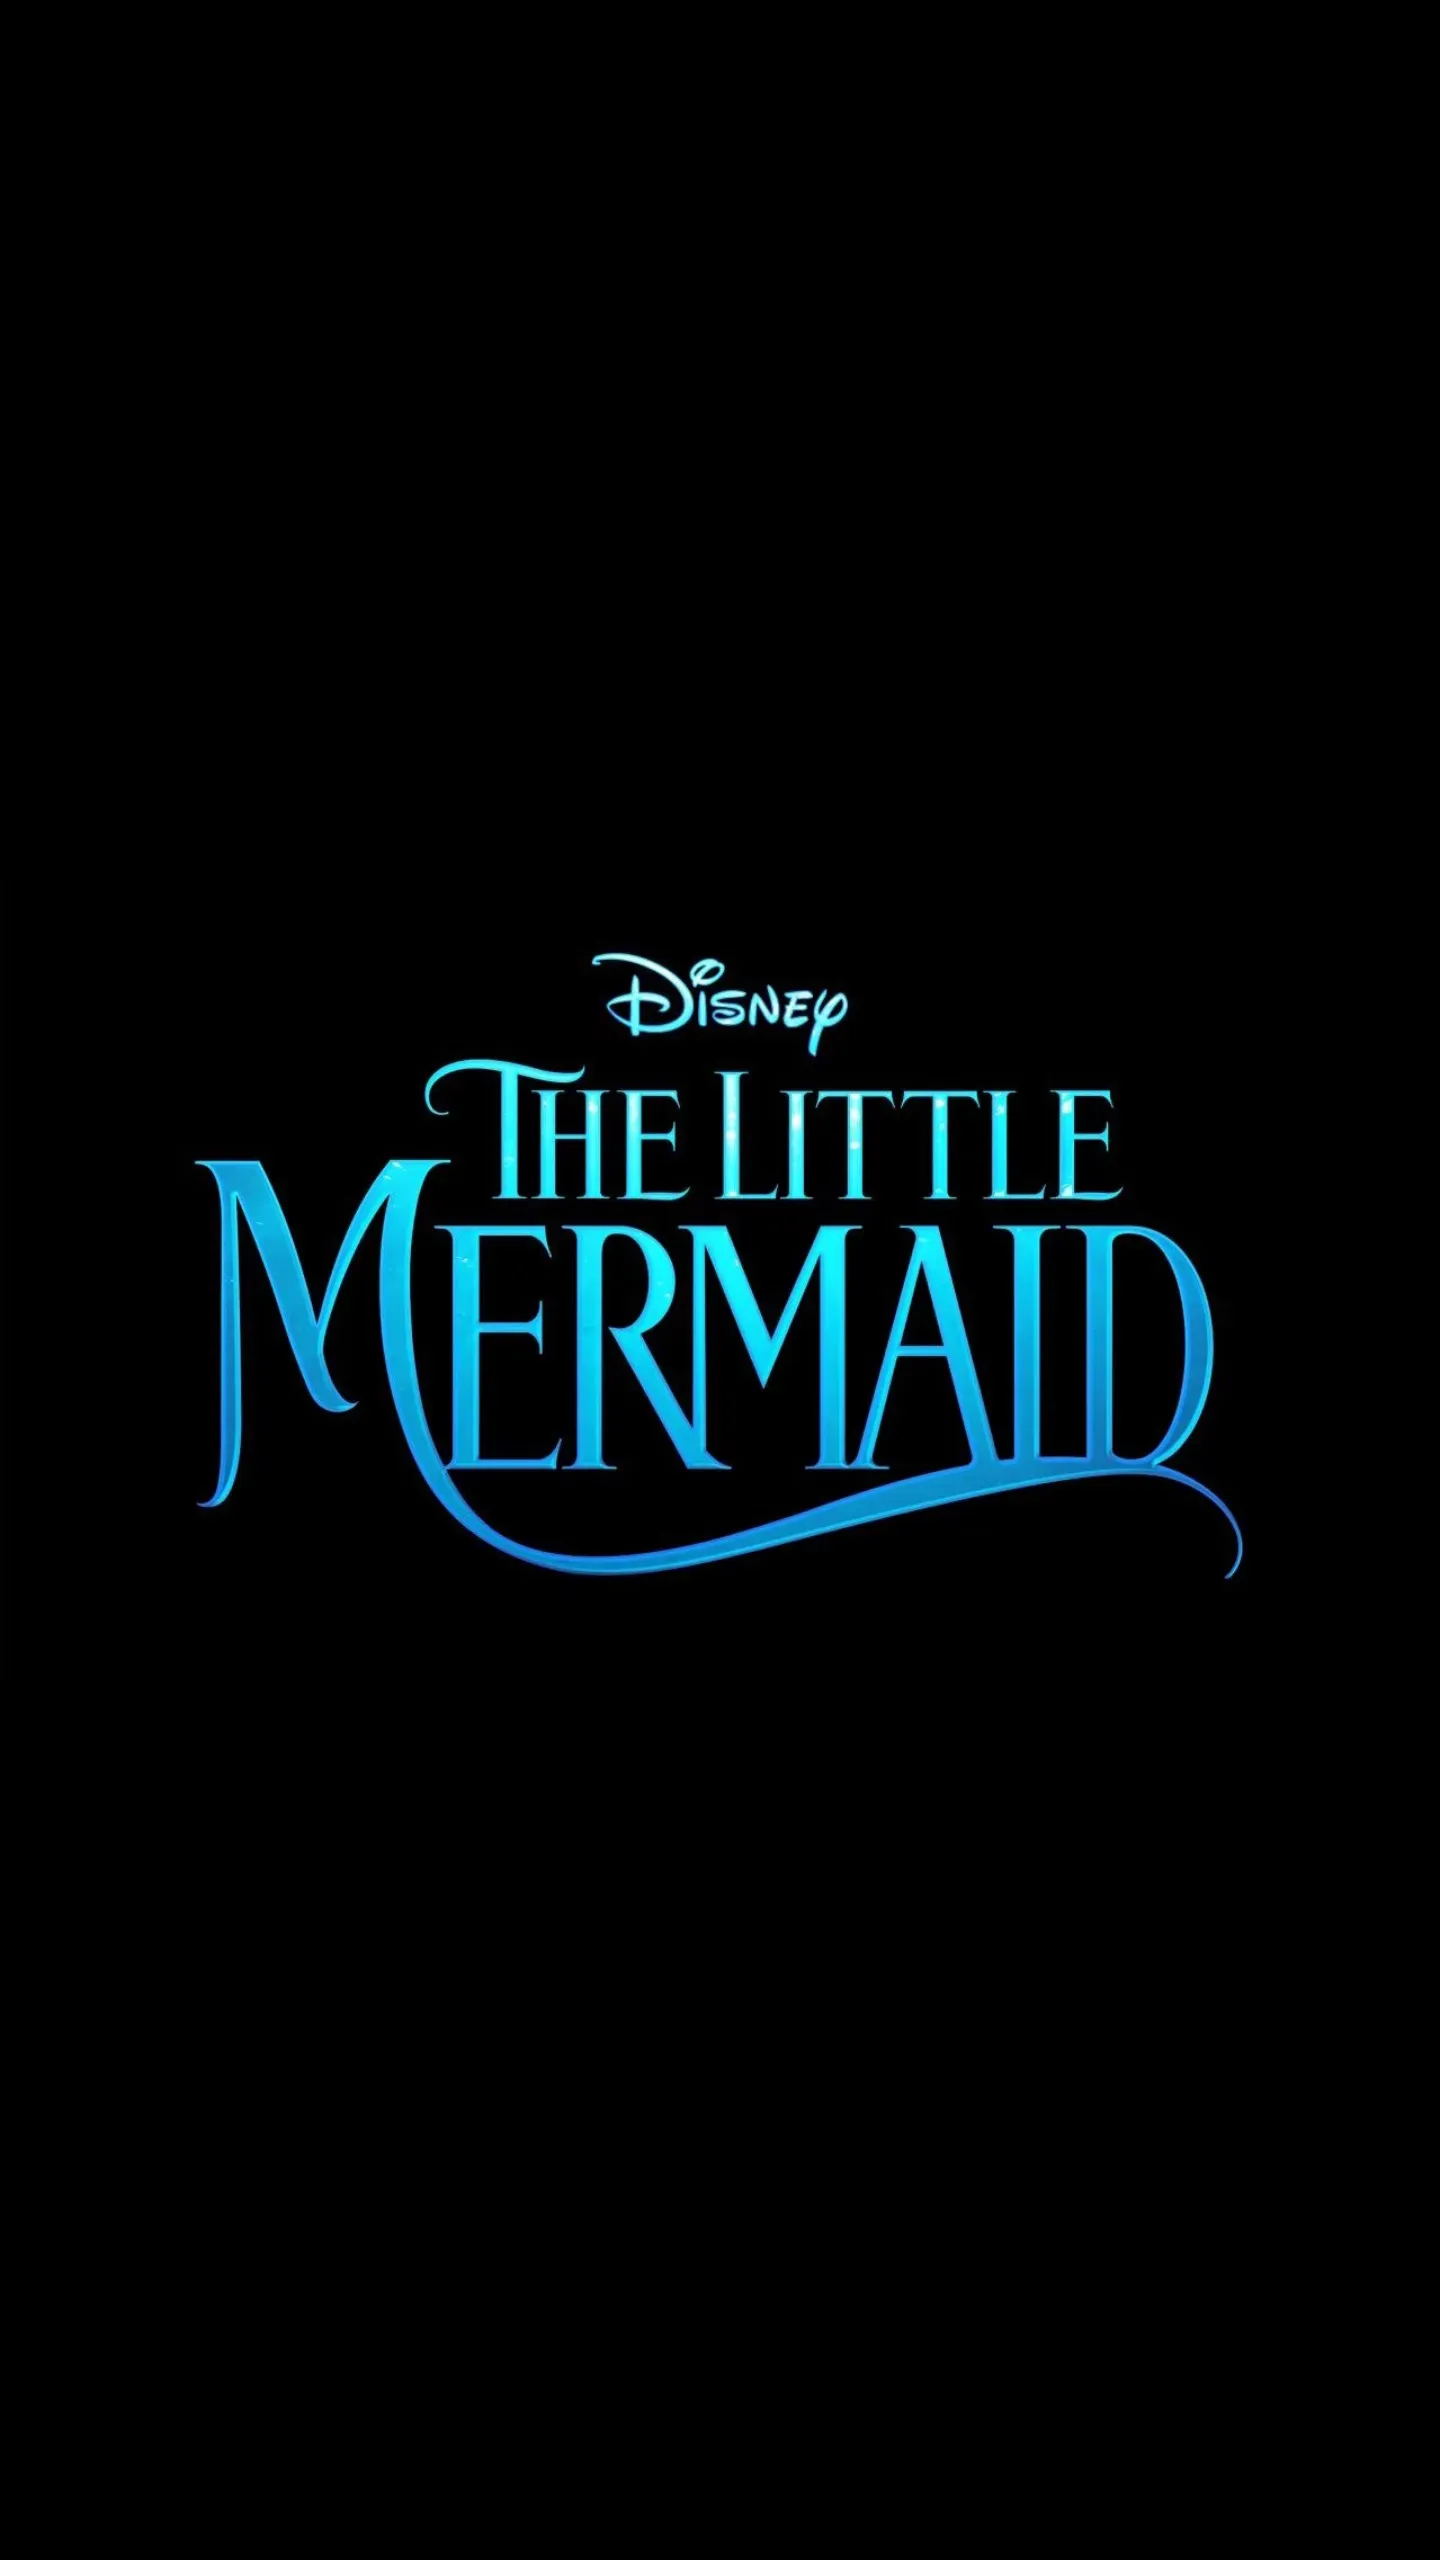 Disney's live-action movie 'The Little Mermaid' released Official Teaser | FMV6